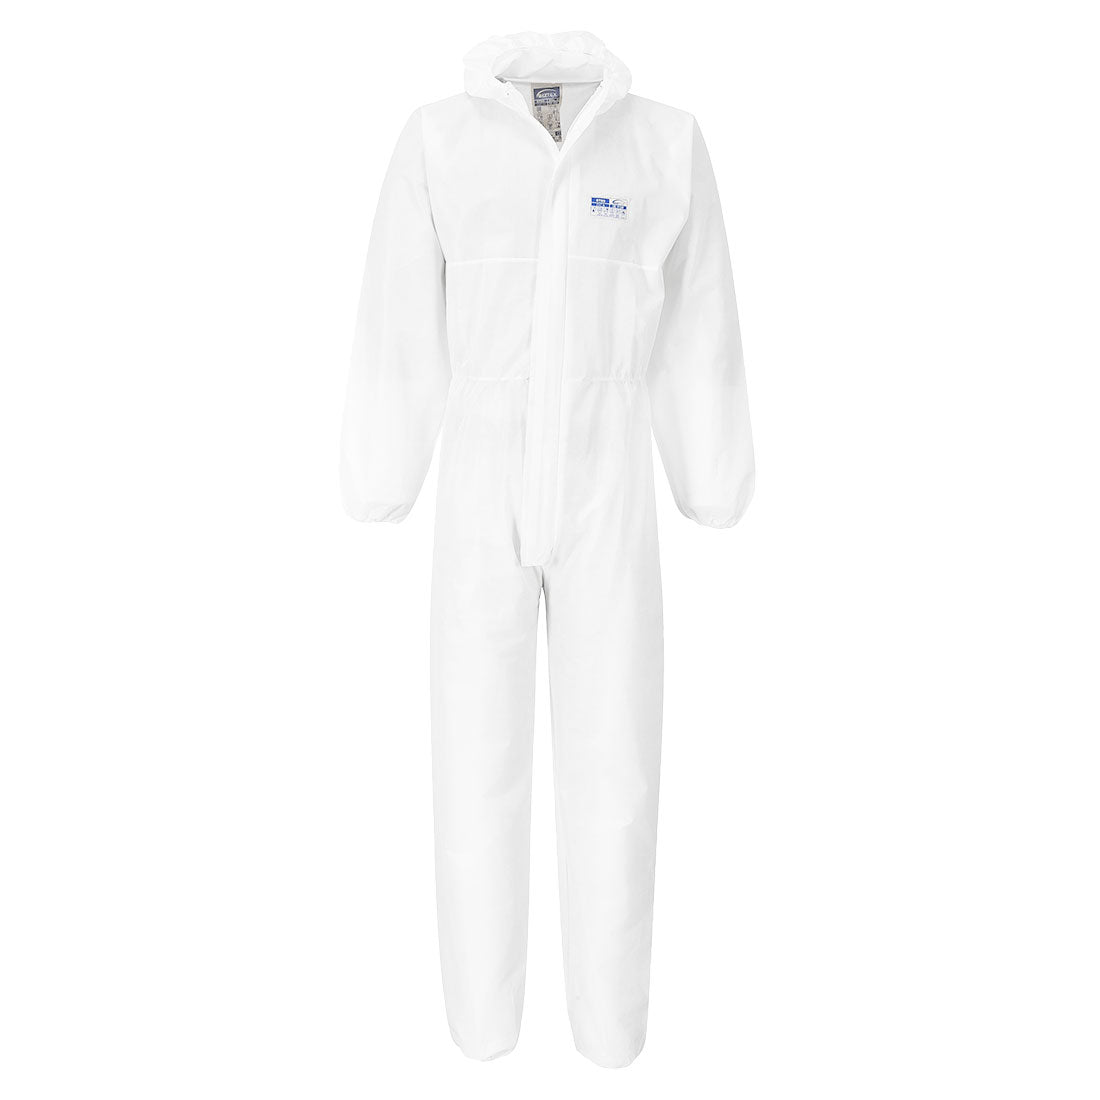 BizTex SMS FR Coverall Type 5/6 (Pk50)  (ST80)